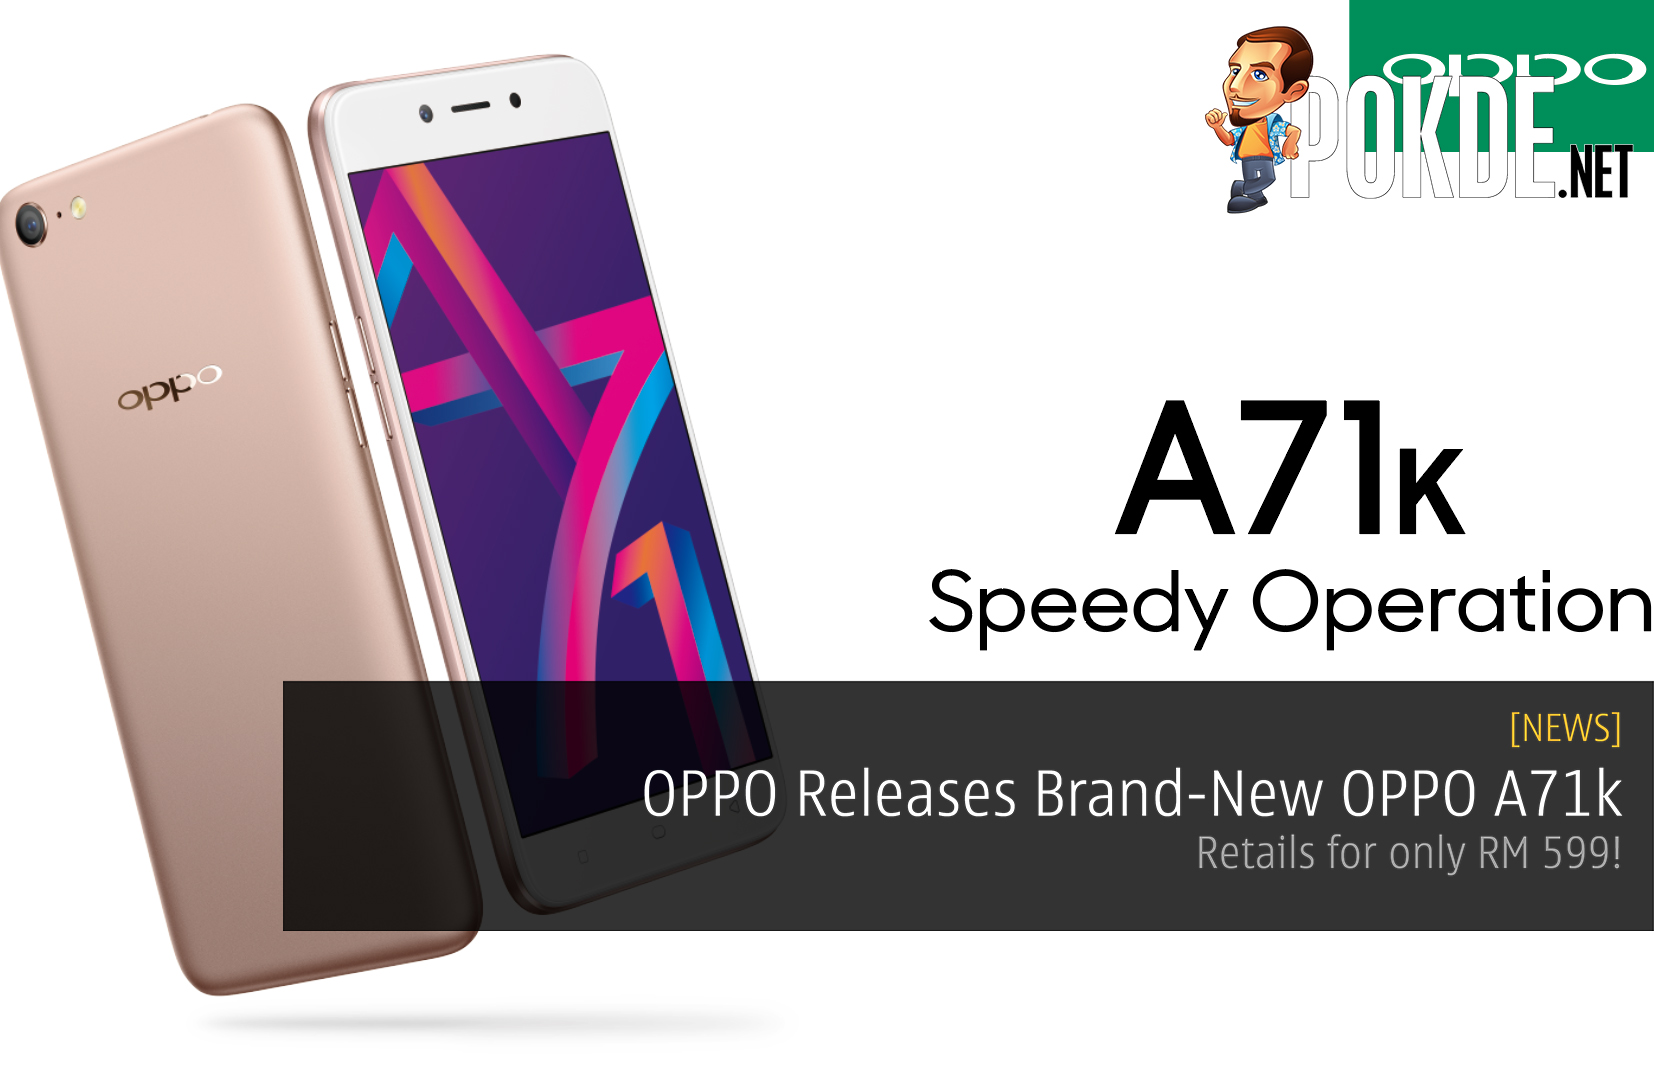 OPPO Releases Brand-New OPPO A71k - Retails for only RM 599! 29